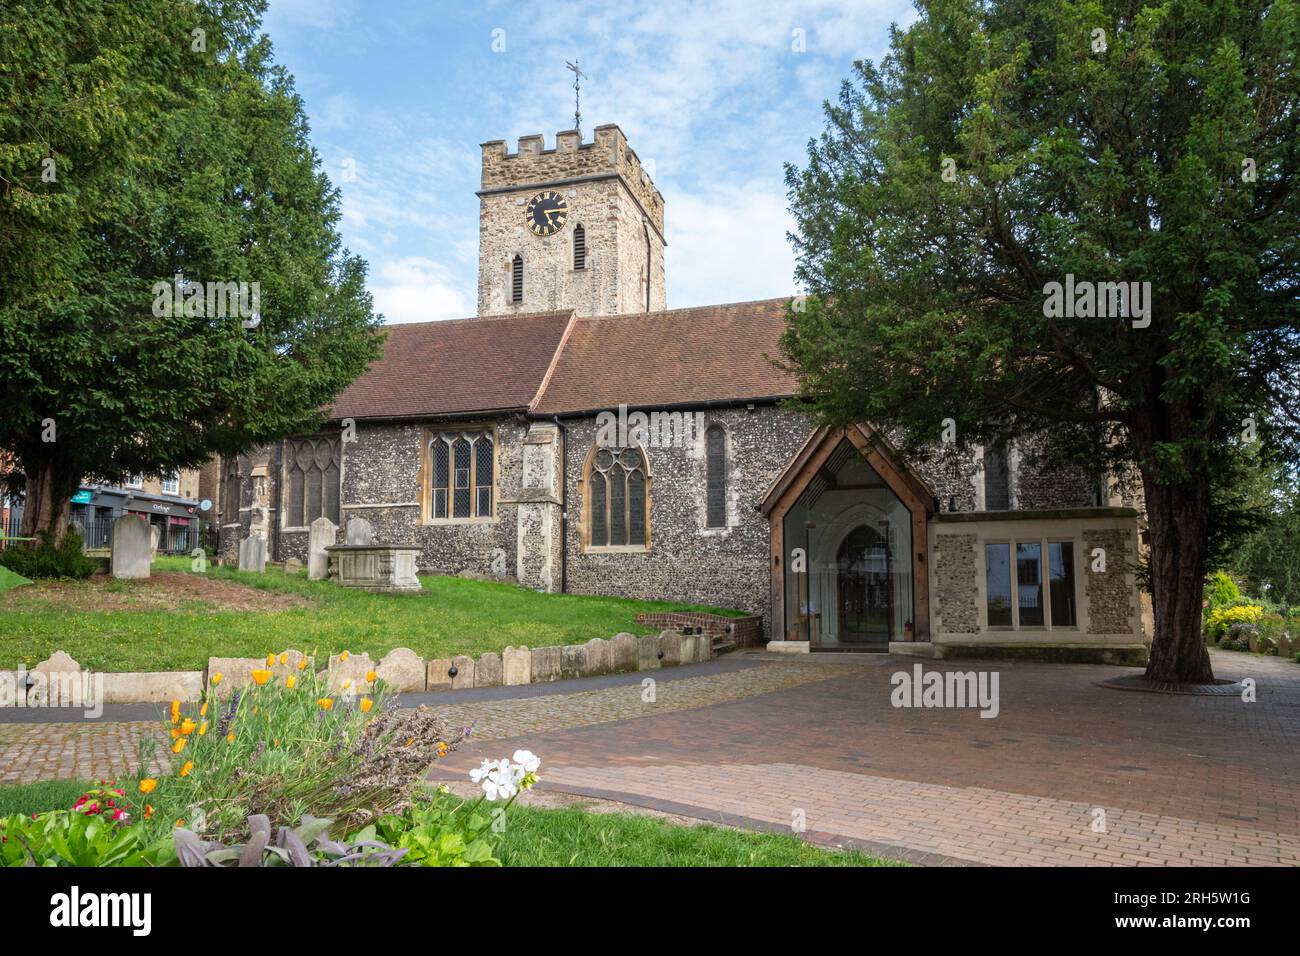 St Mary's Church in Guildford, with an Anglo Saxon tower, a grade I listed building, Surrey, England, UK Stock Photo